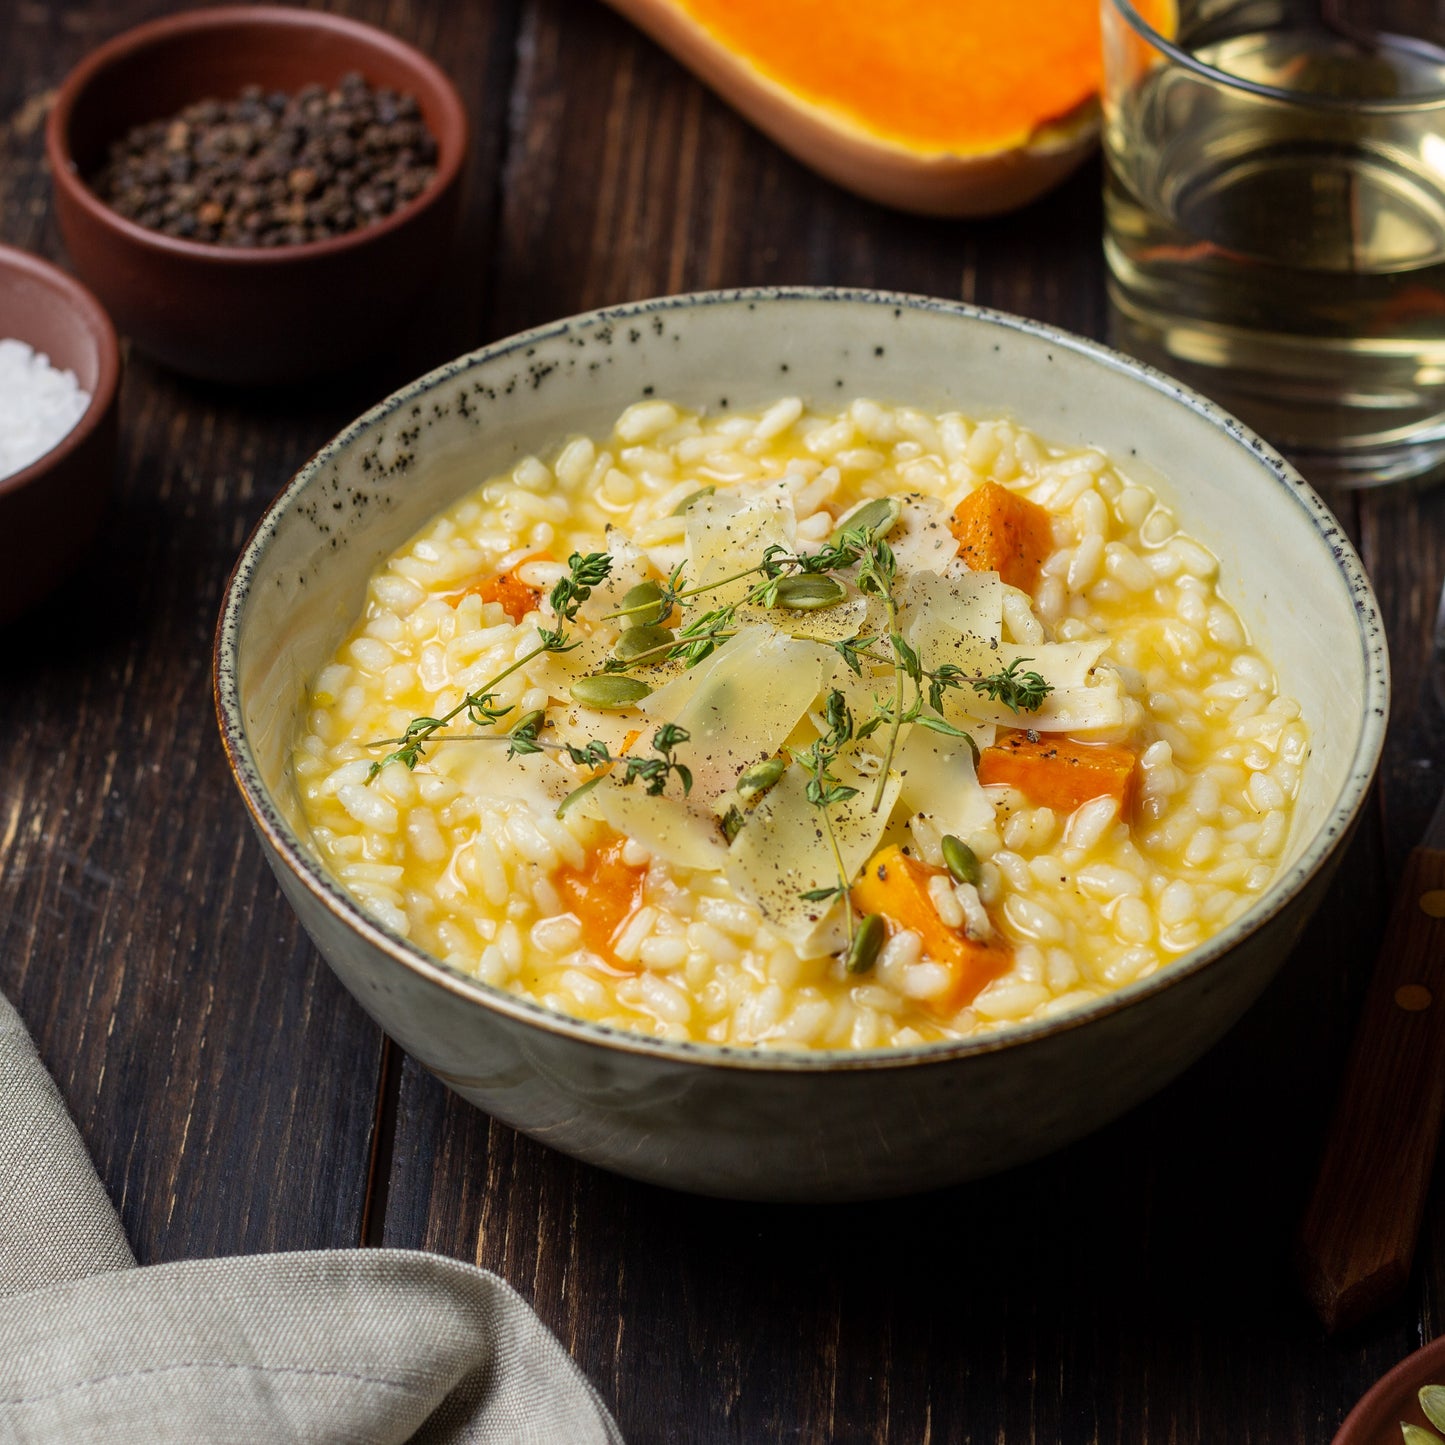 ROASTED SQUASH RISOTTO with diced chicken